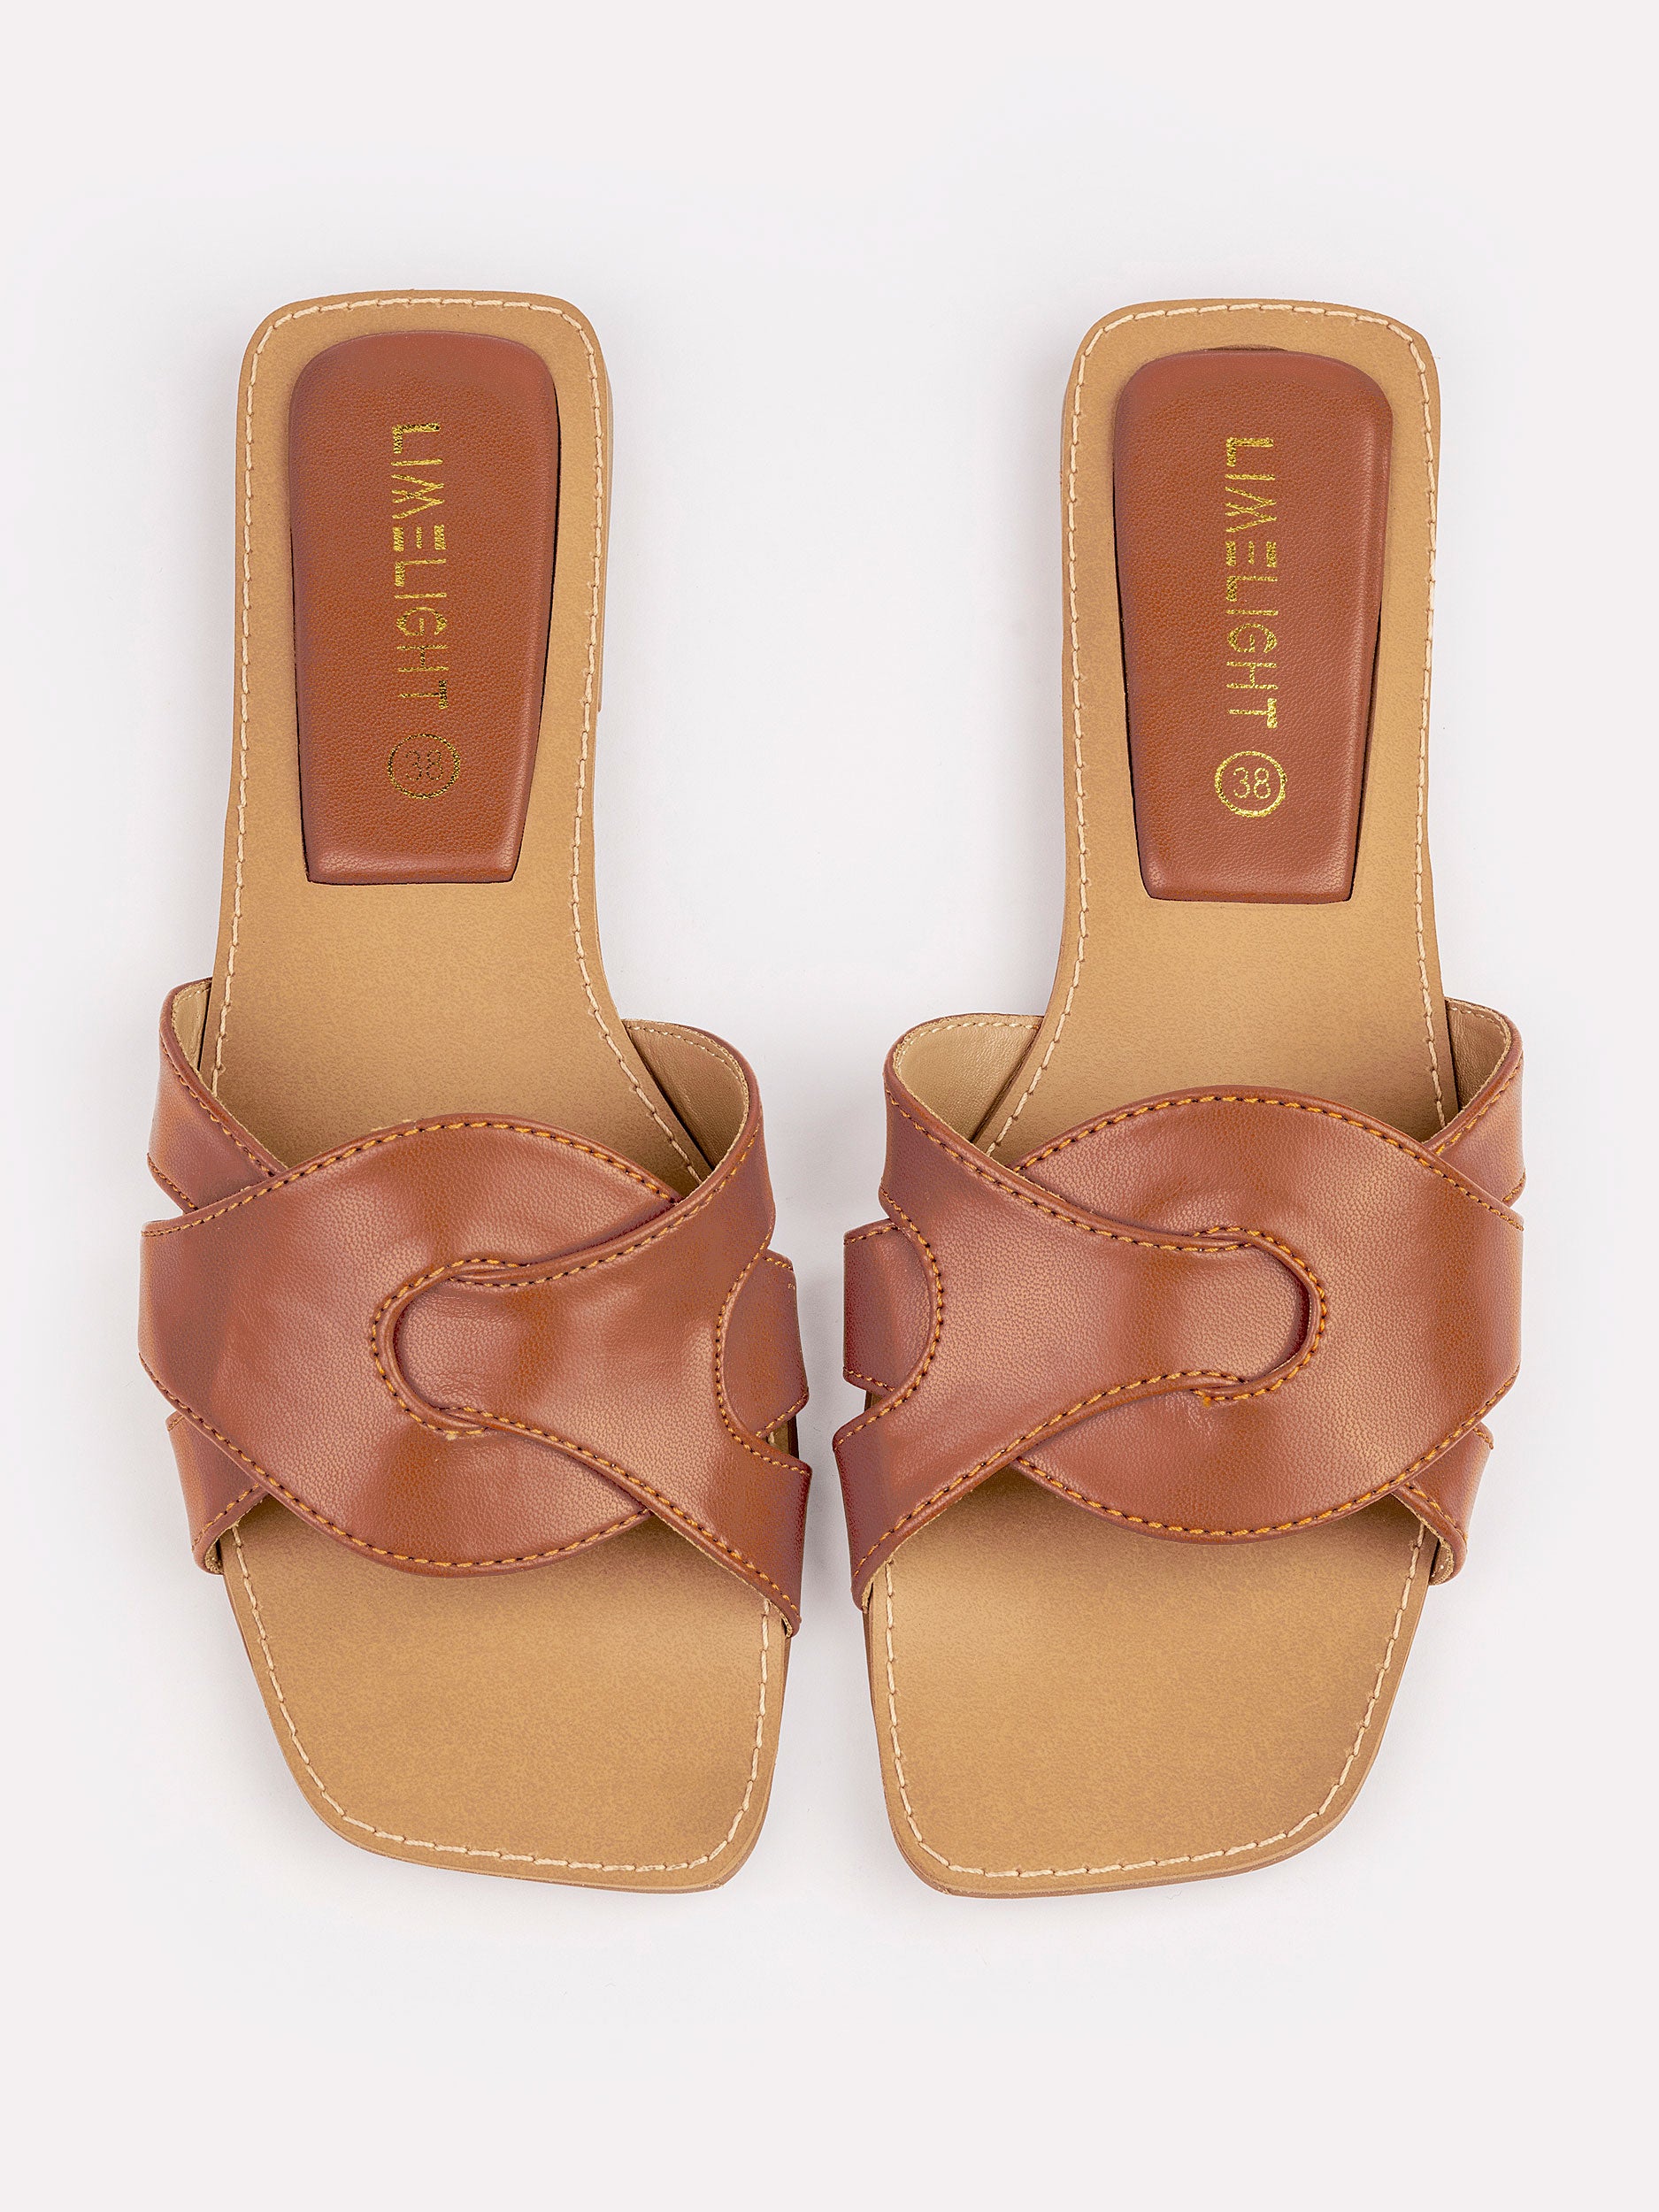 looped-straps-flats